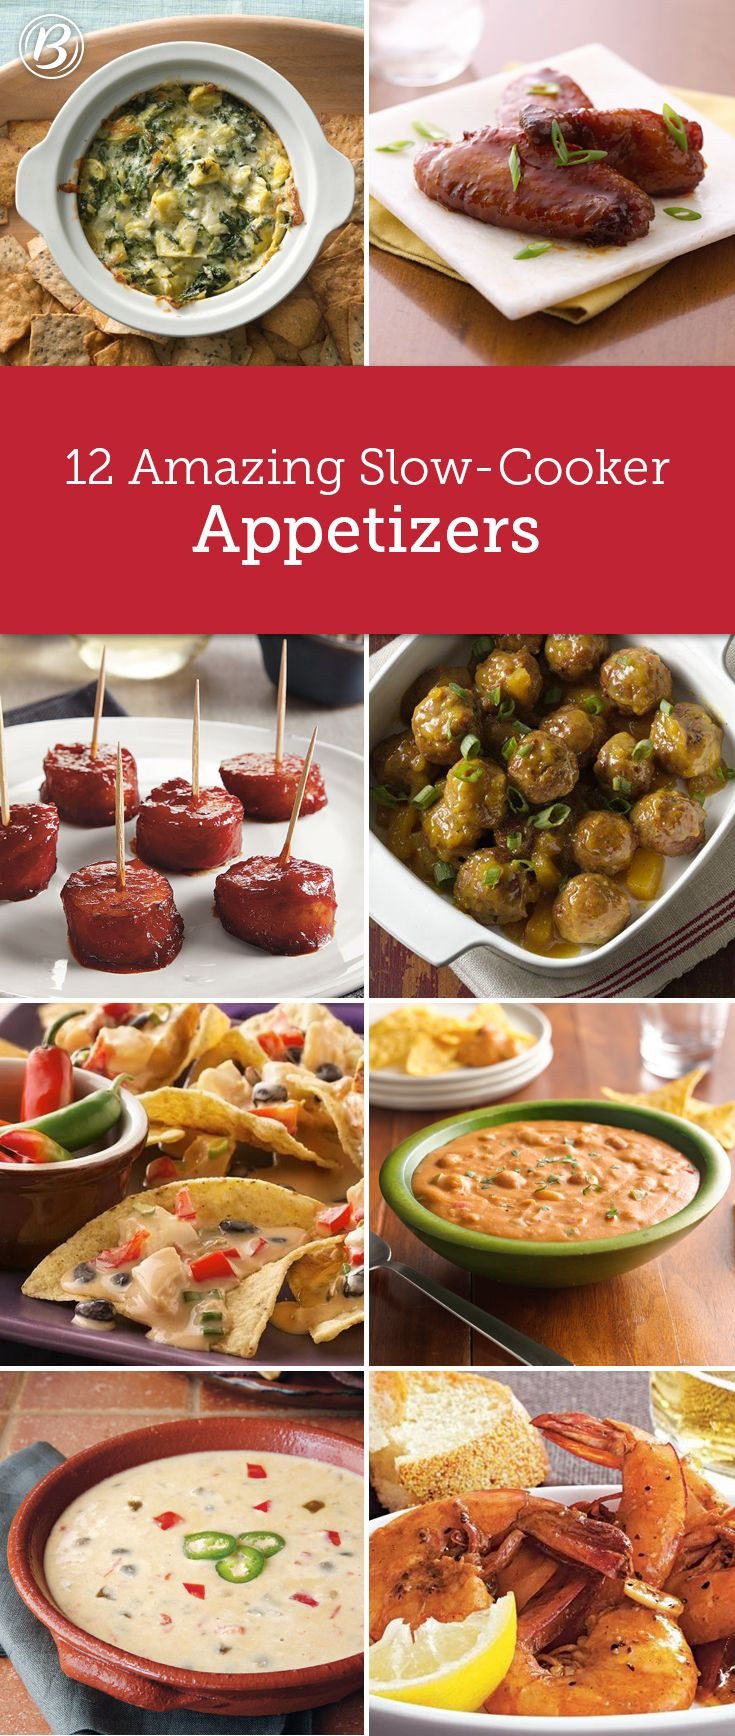 14 Easy Slow Cooker Appetizers
 Slow Cooker Apps That Are Ready to Party